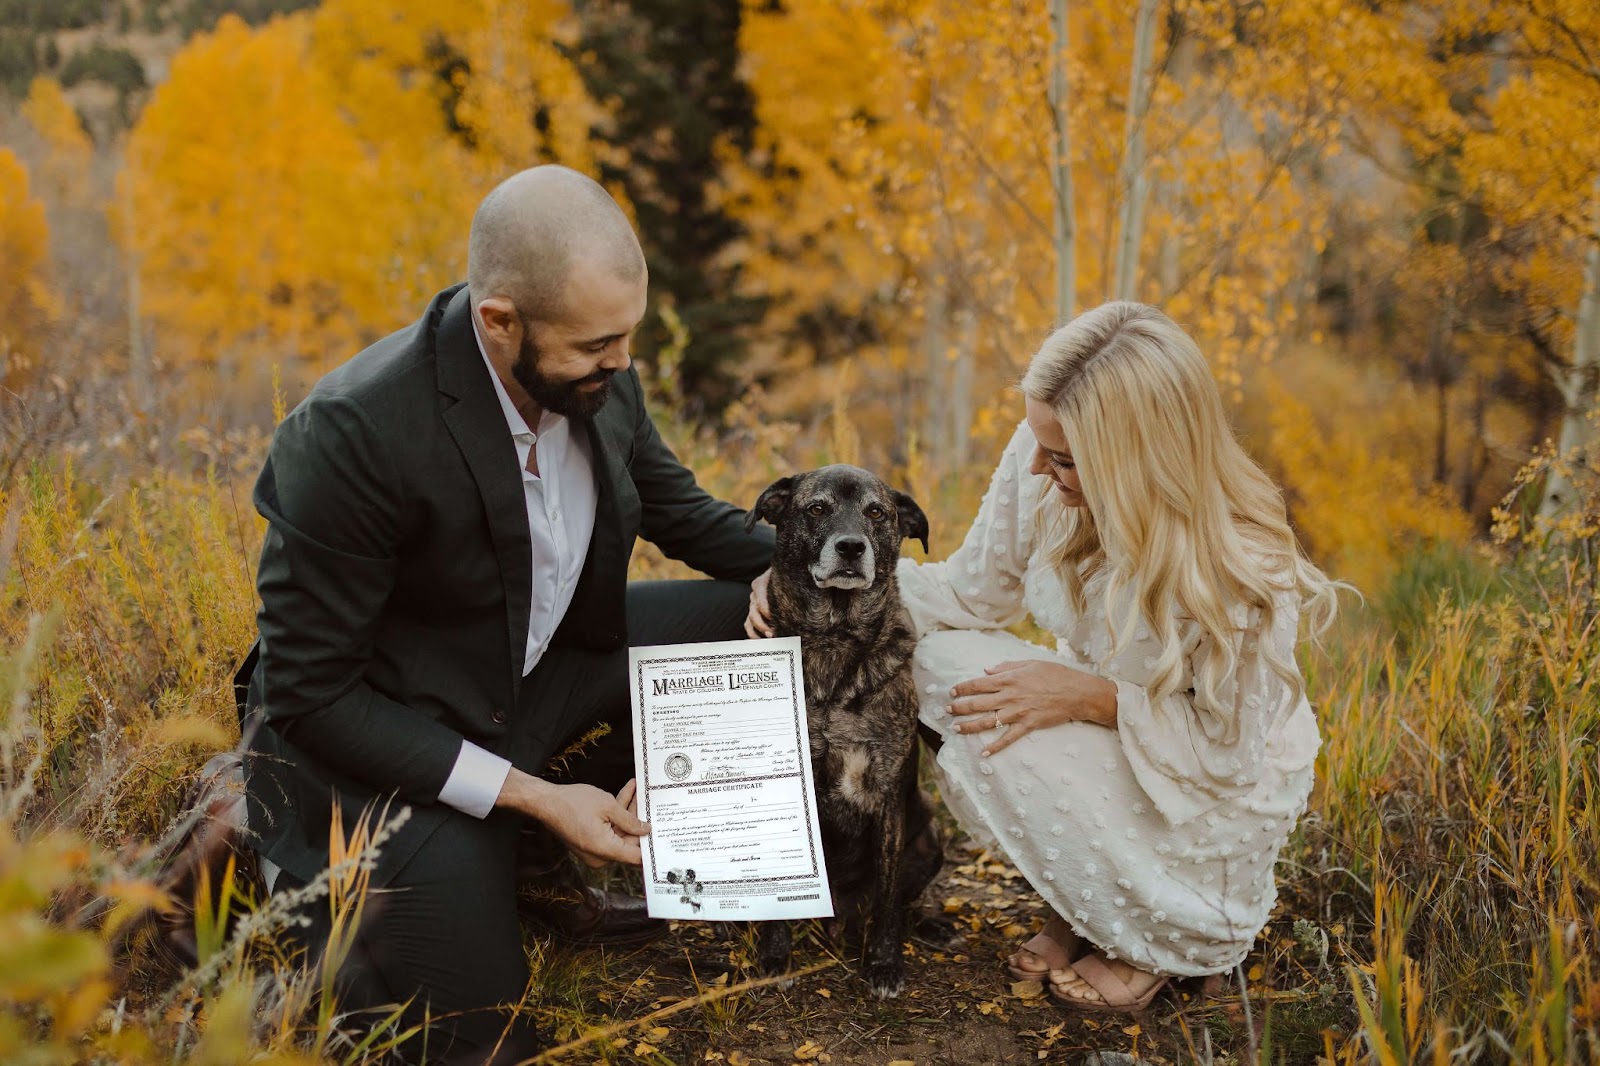 bride and groom posing with their dog and holding marriage license